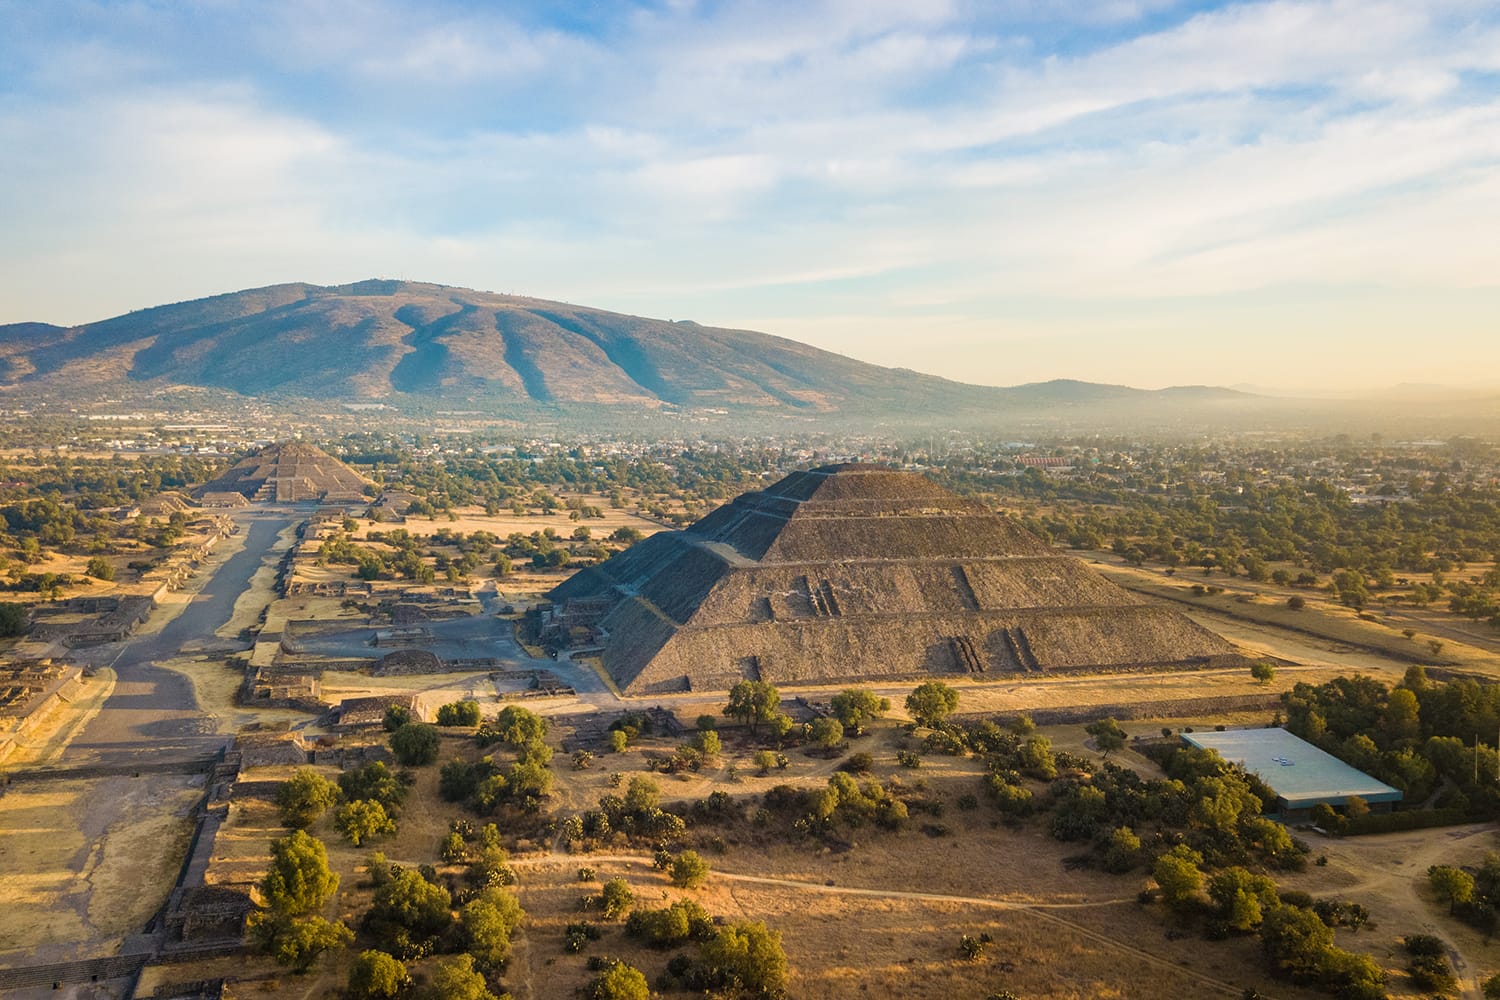 Aerial view of Teotihuacan, near Mexico City in Mexico